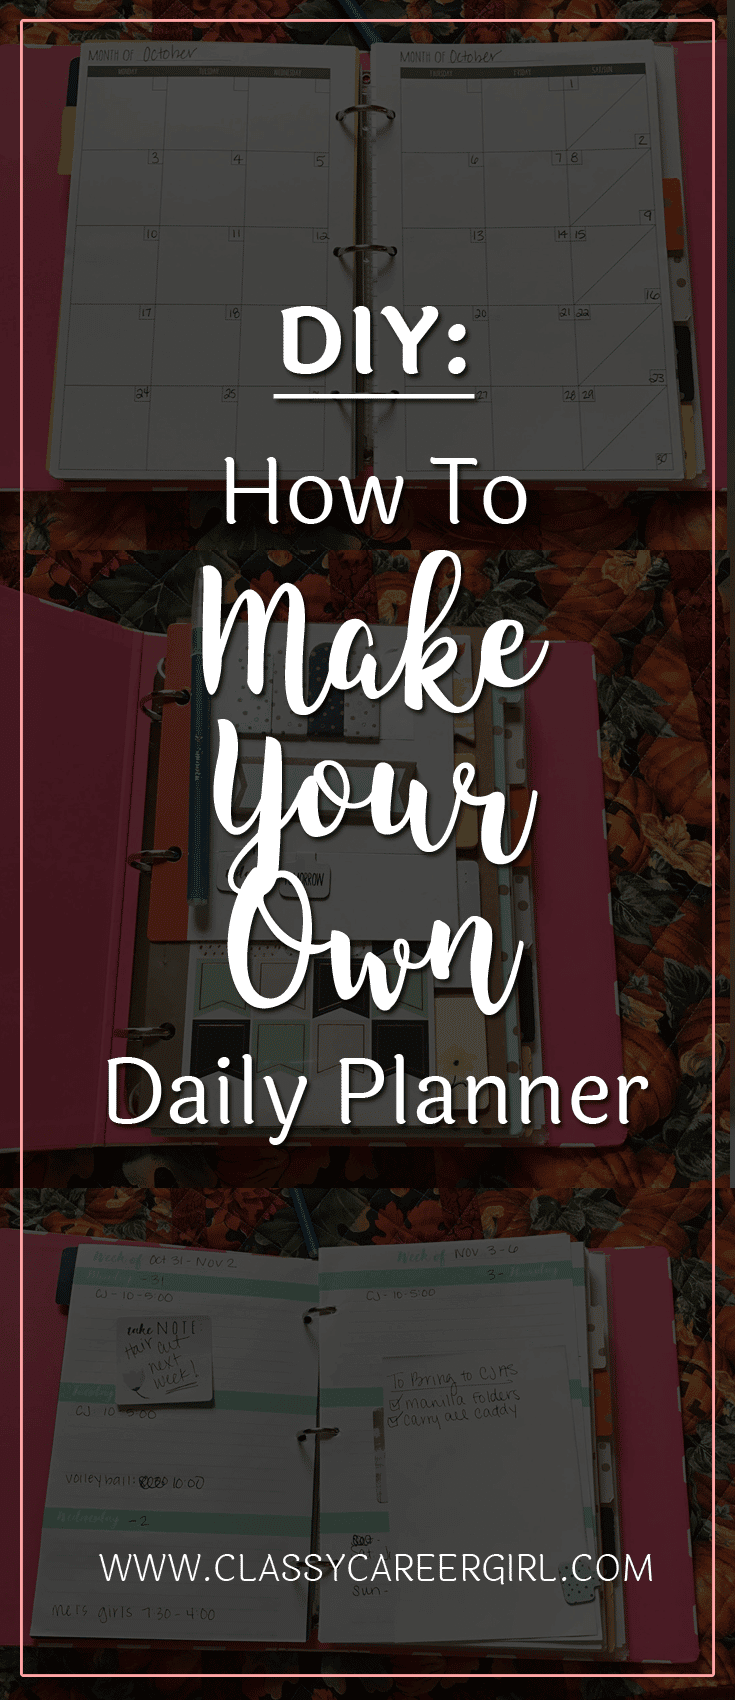 diy-how-to-make-your-own-daily-planner-classy-career-girl